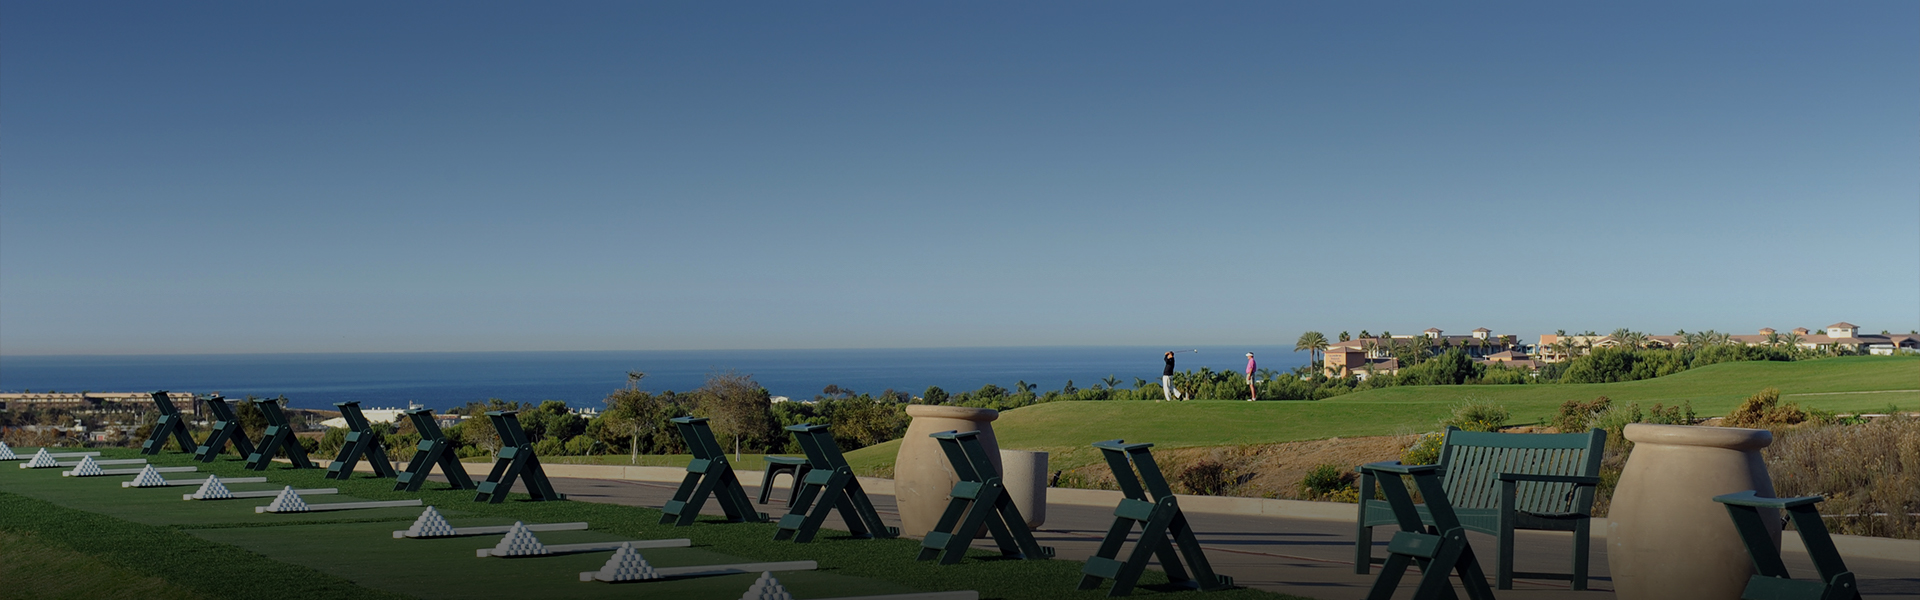 panoramic view of the driving range and the ocean in the far distance